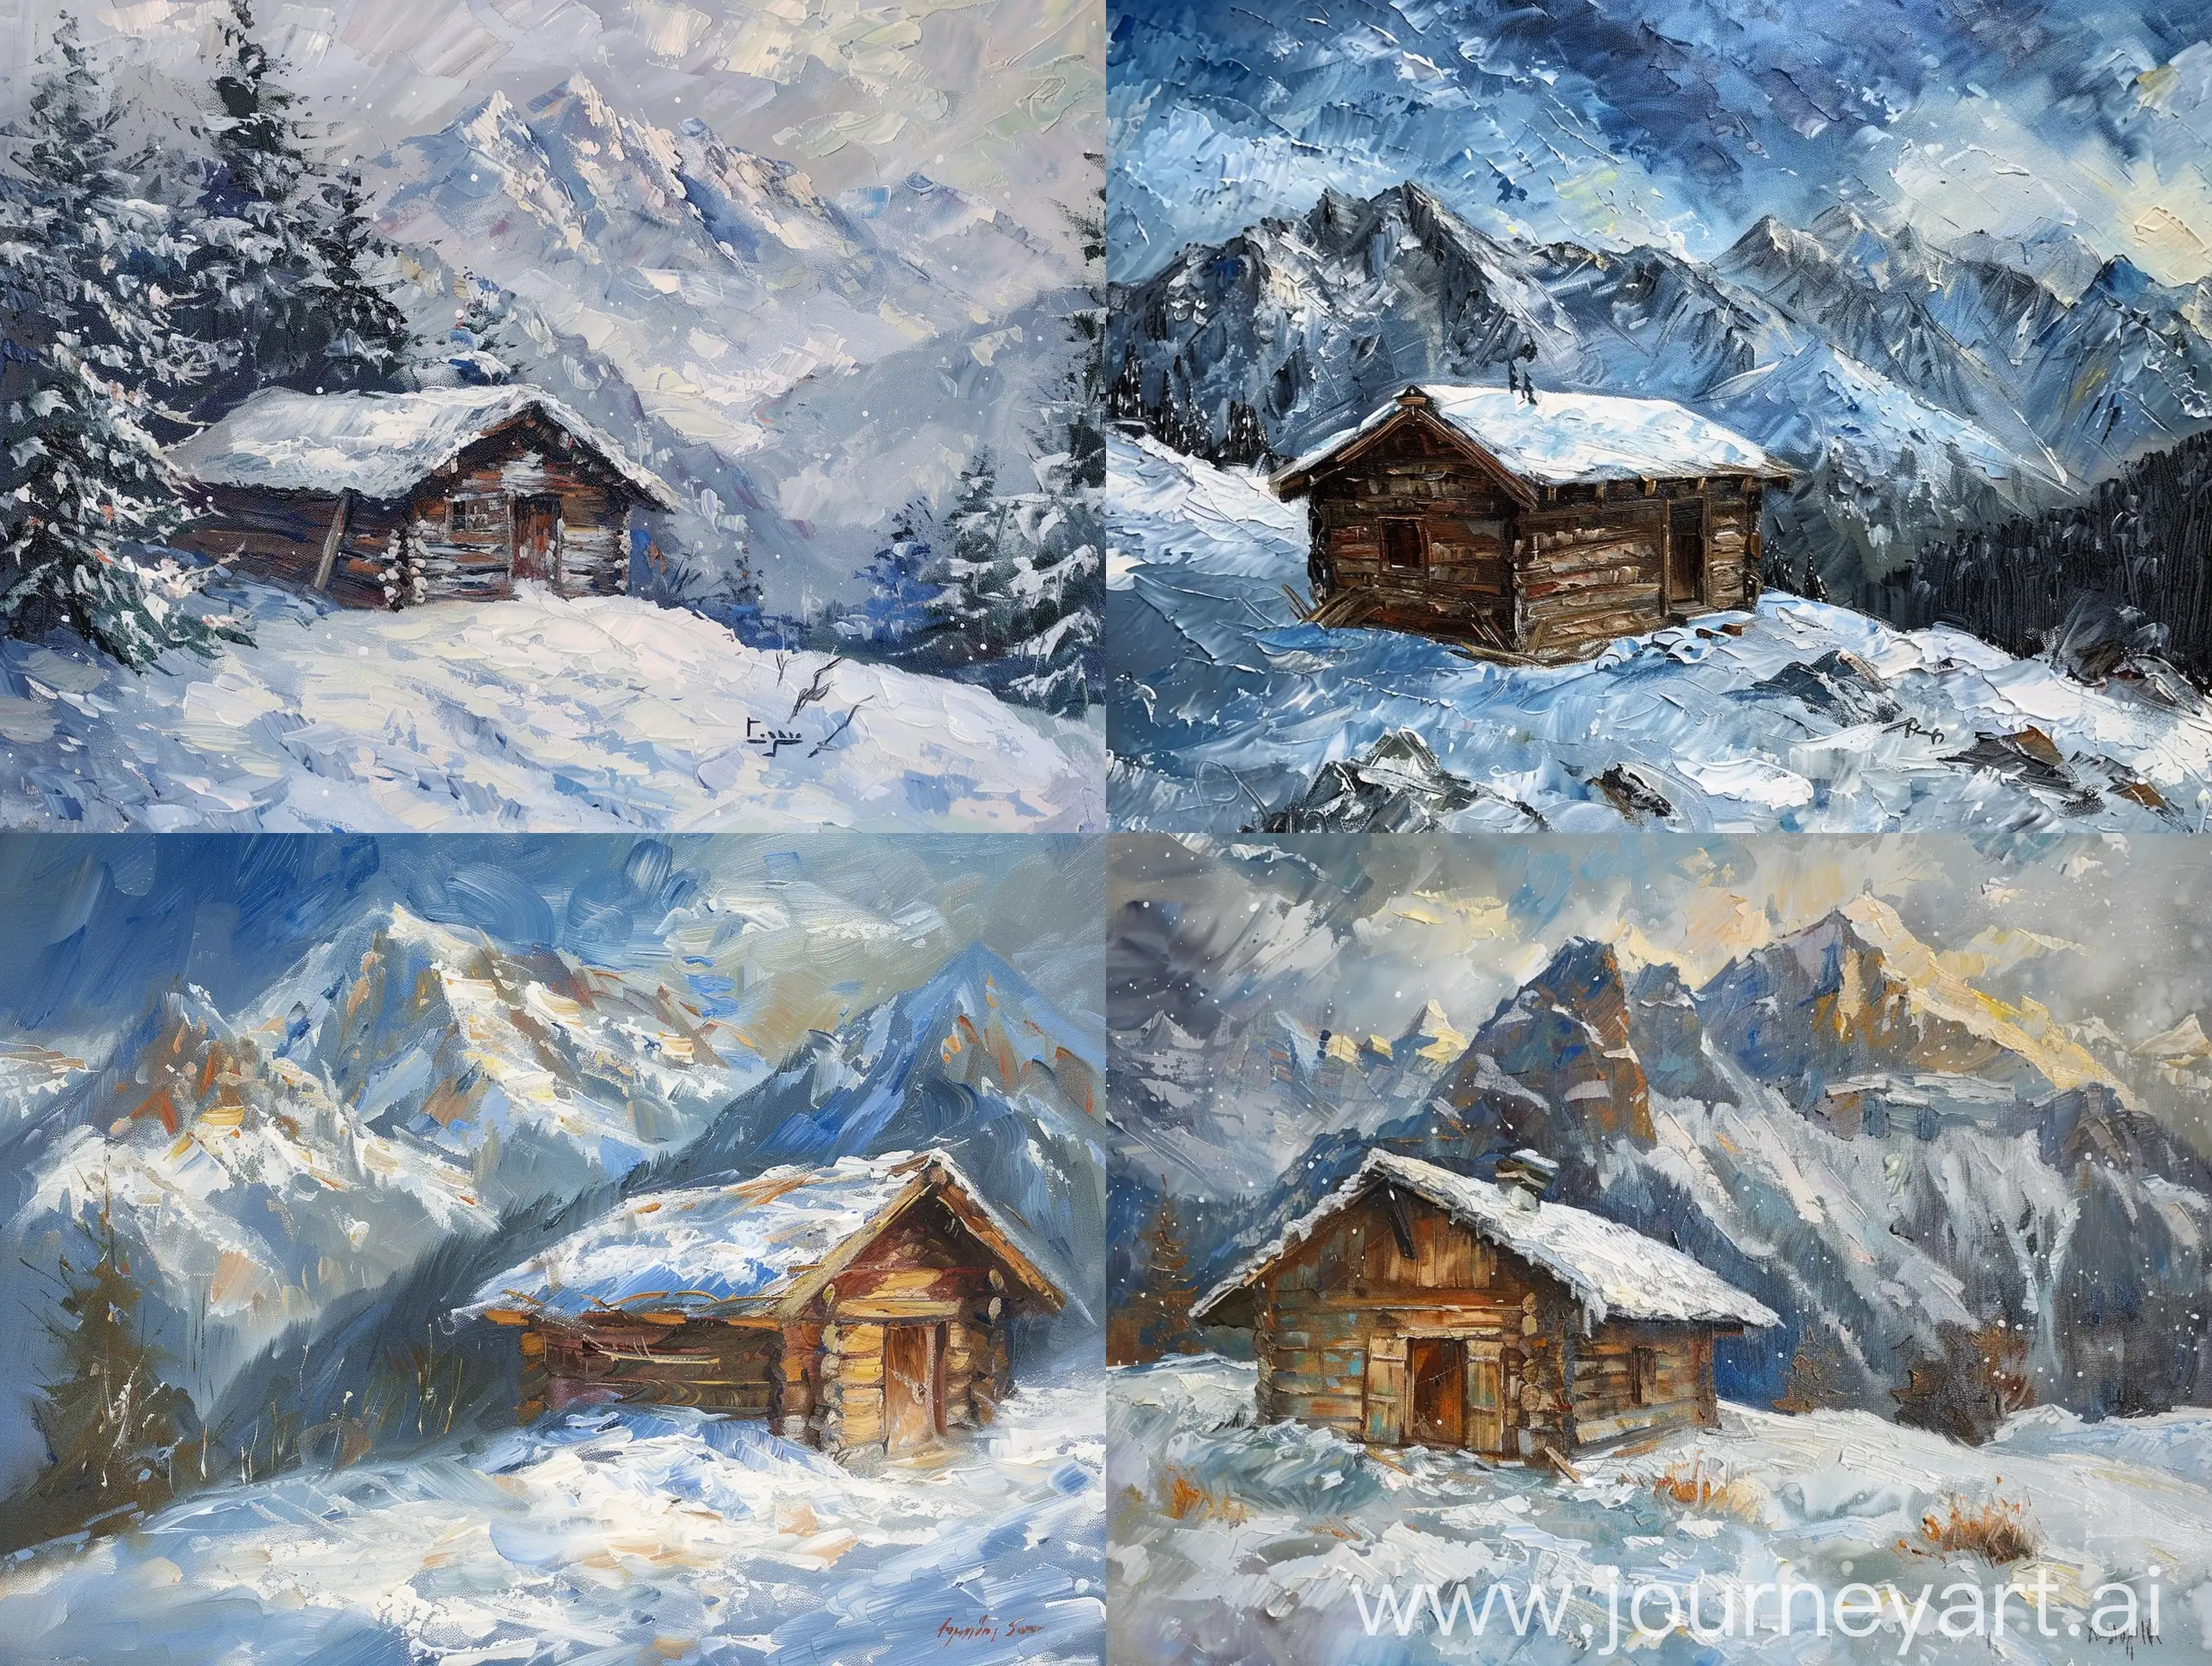 genre oil painting of a wooden hut in mountains covered in snow in van gogh style